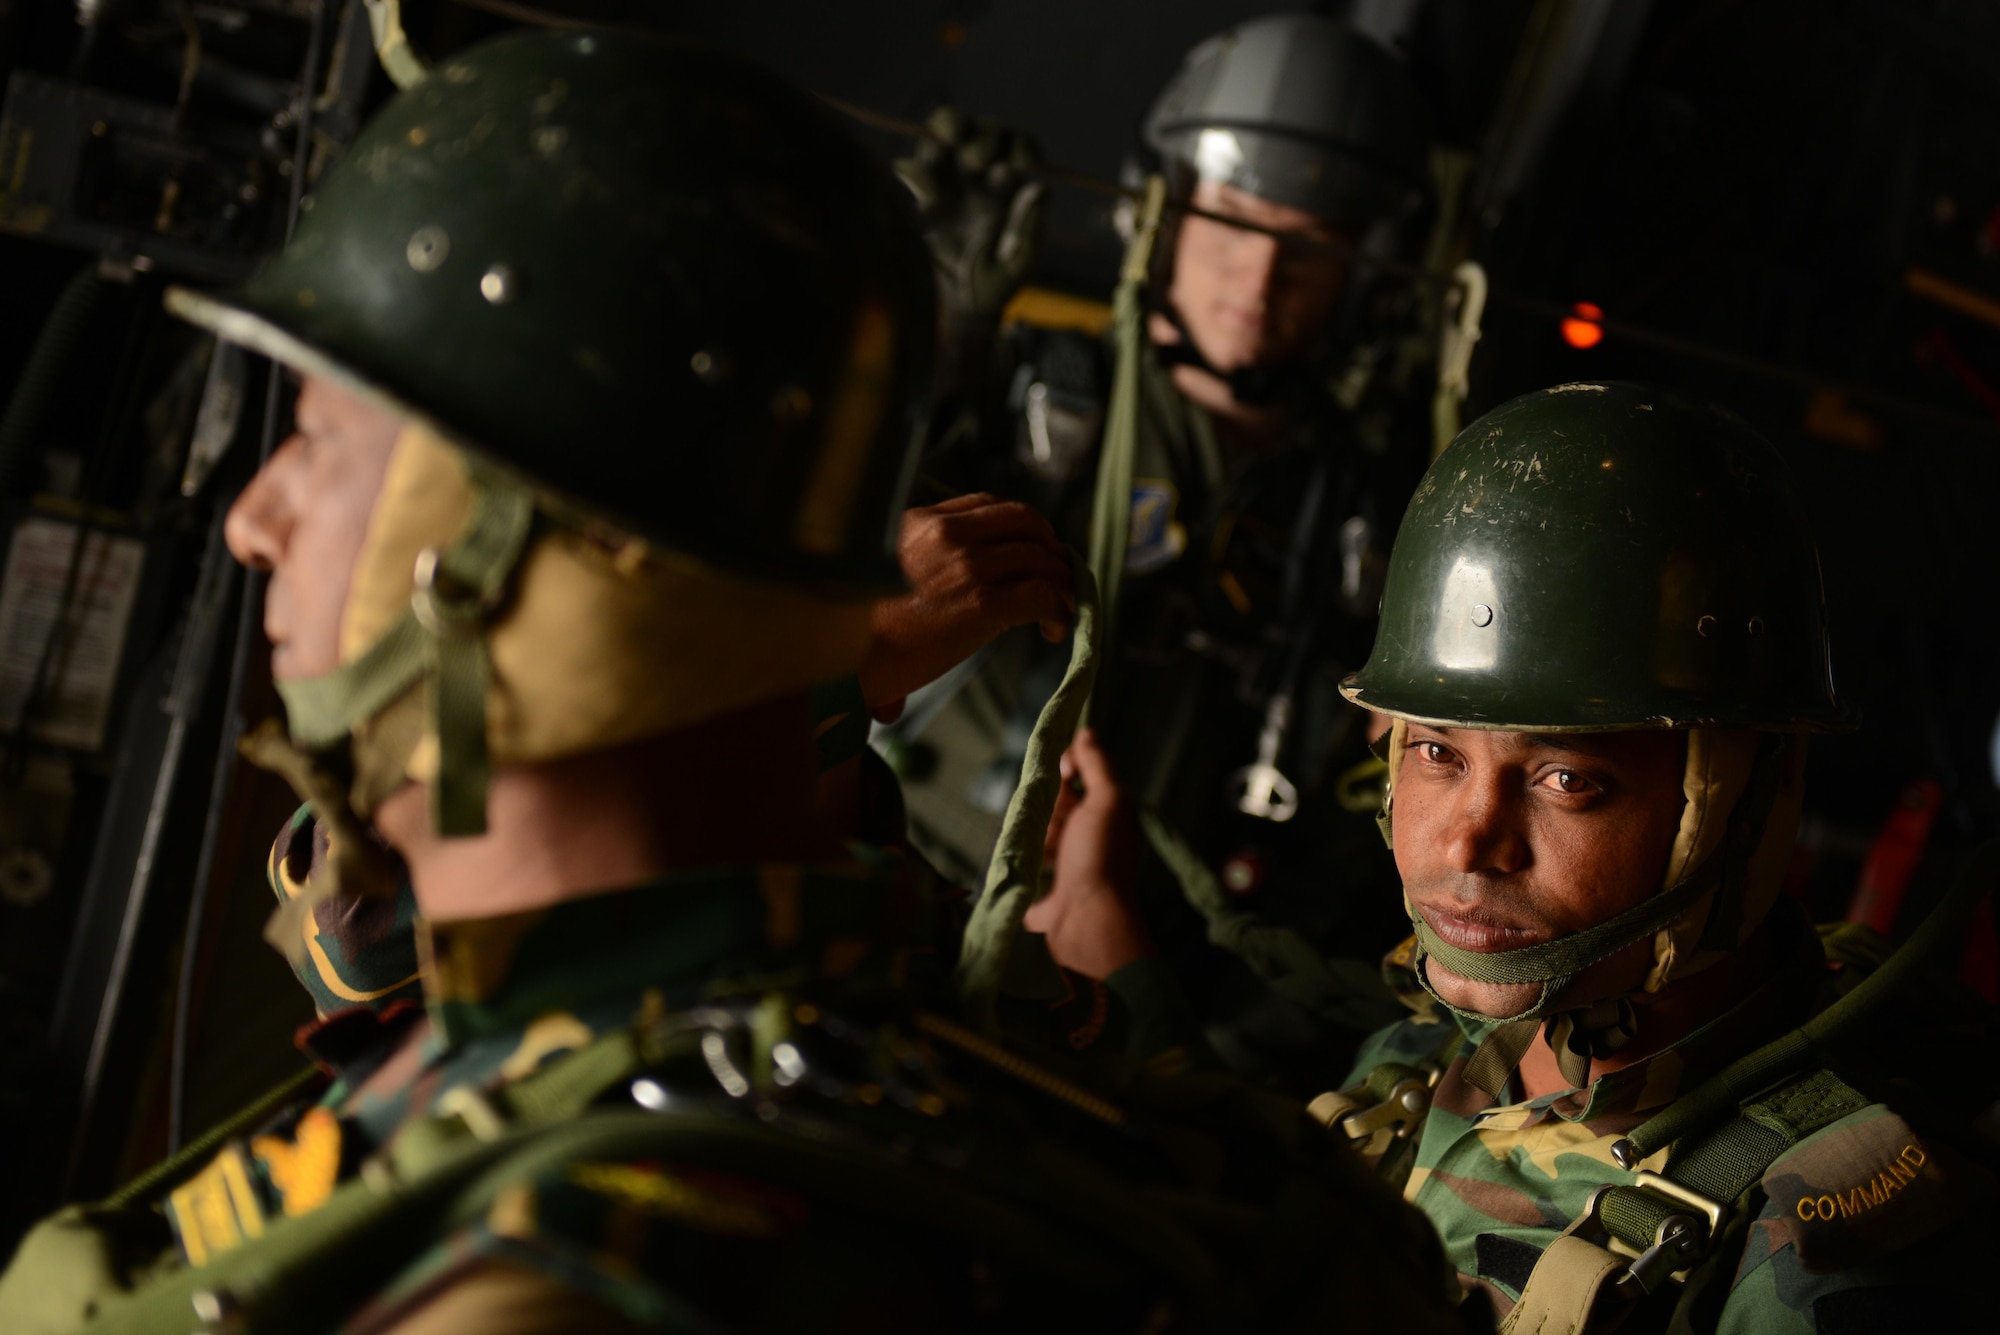 Bangladeshi commandos prepare to jump from a U.S. Air Force C-130H aircraft Jan. 24, 2015 during exercise Cope South near Sylhet, Bangladesh. The exercise helps cultivate common bonds, foster goodwill, and improve readiness and compatibility between members of the Bangladesh and U.S. Air Forces. (U.S. Air Force photo/1st Lt. Jake Bailey)